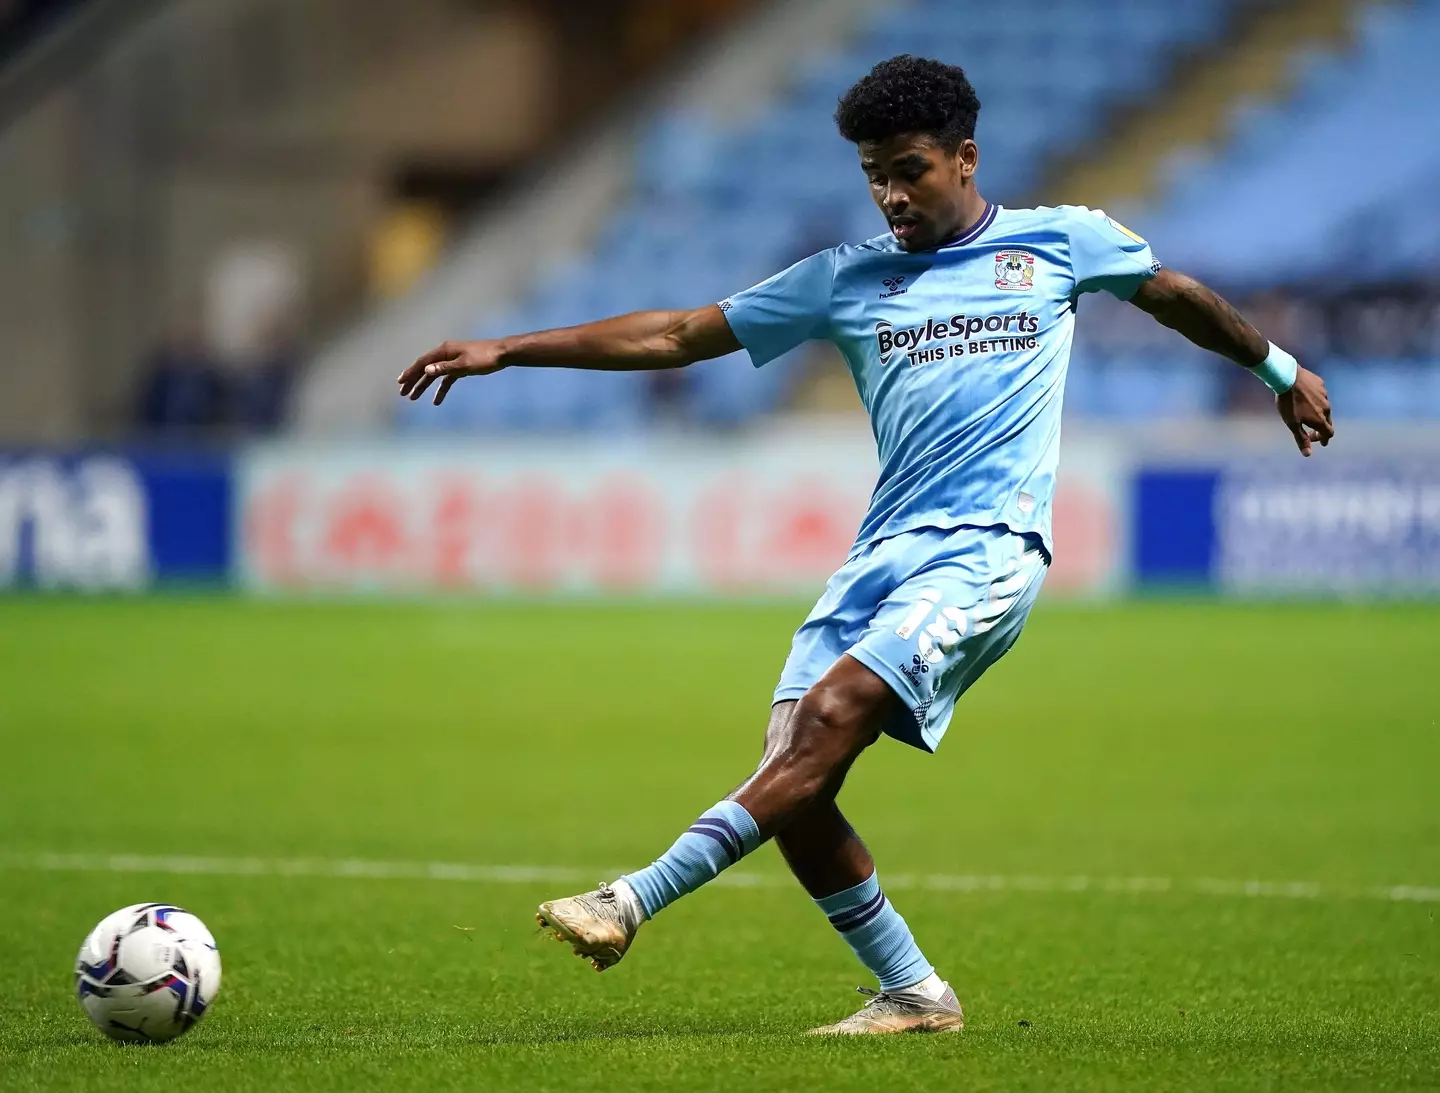 Ian Maatsen featuring for Coventry City on loan from Chelsea. (Alamy)